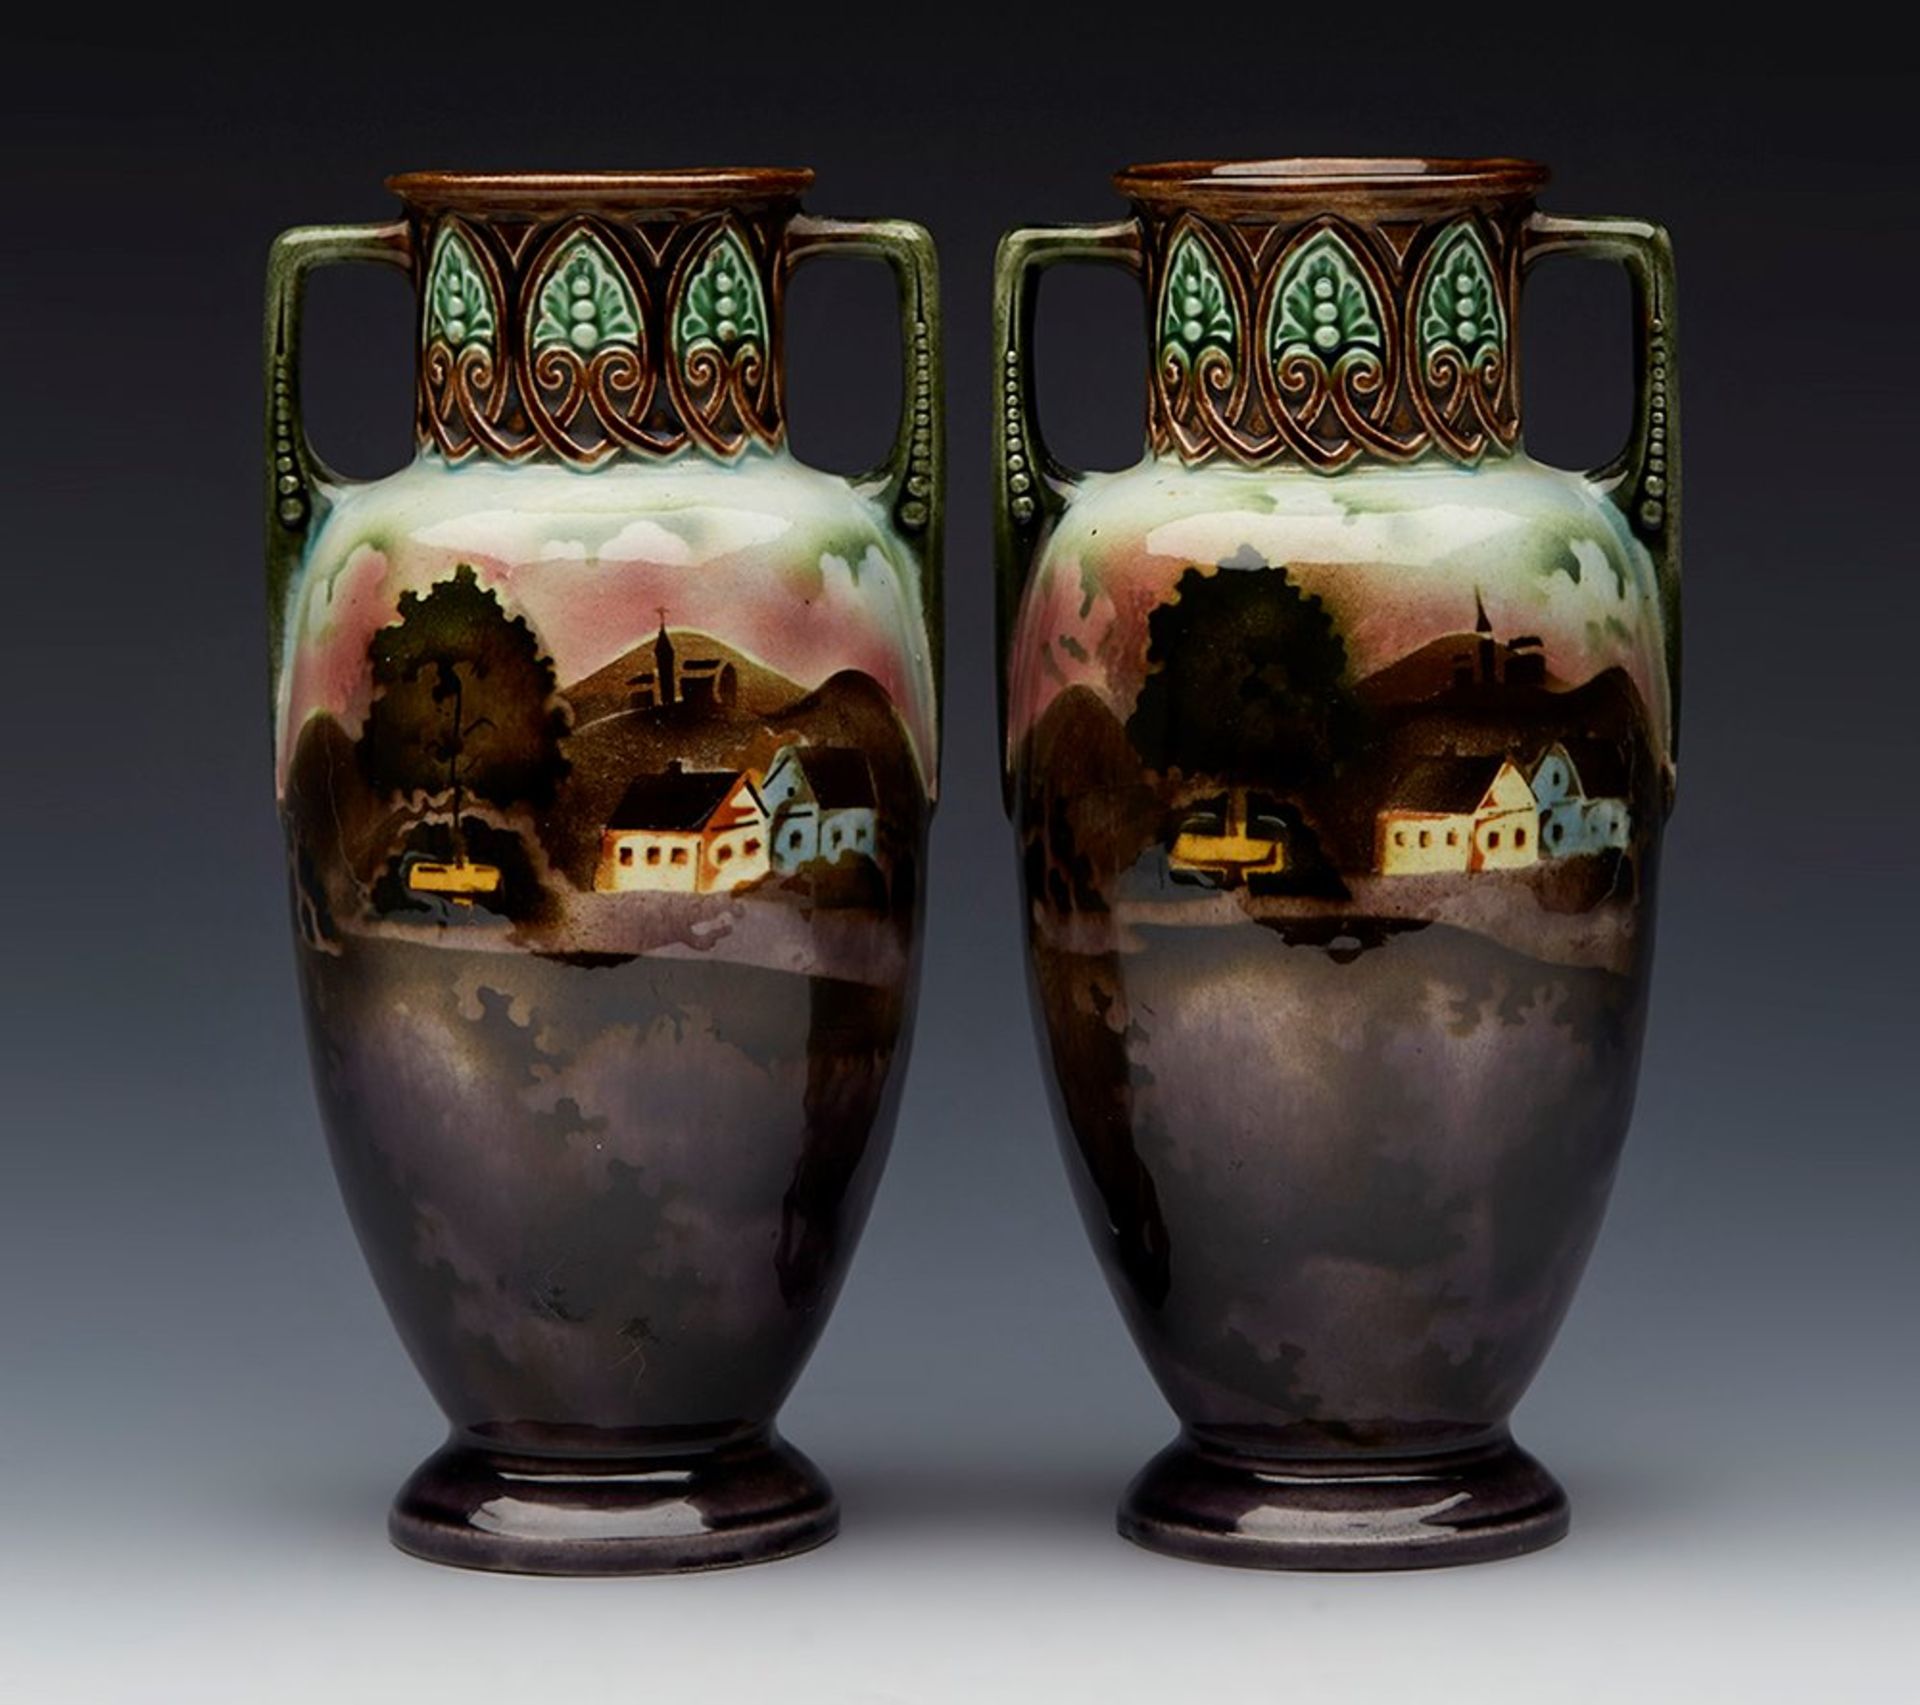 PAIR ANTIQUE CONTINENTAL MAJOLICA LANDSCAPE PAINTED VASES 19TH C.   DIMENSIONS   Height 17,5cm,